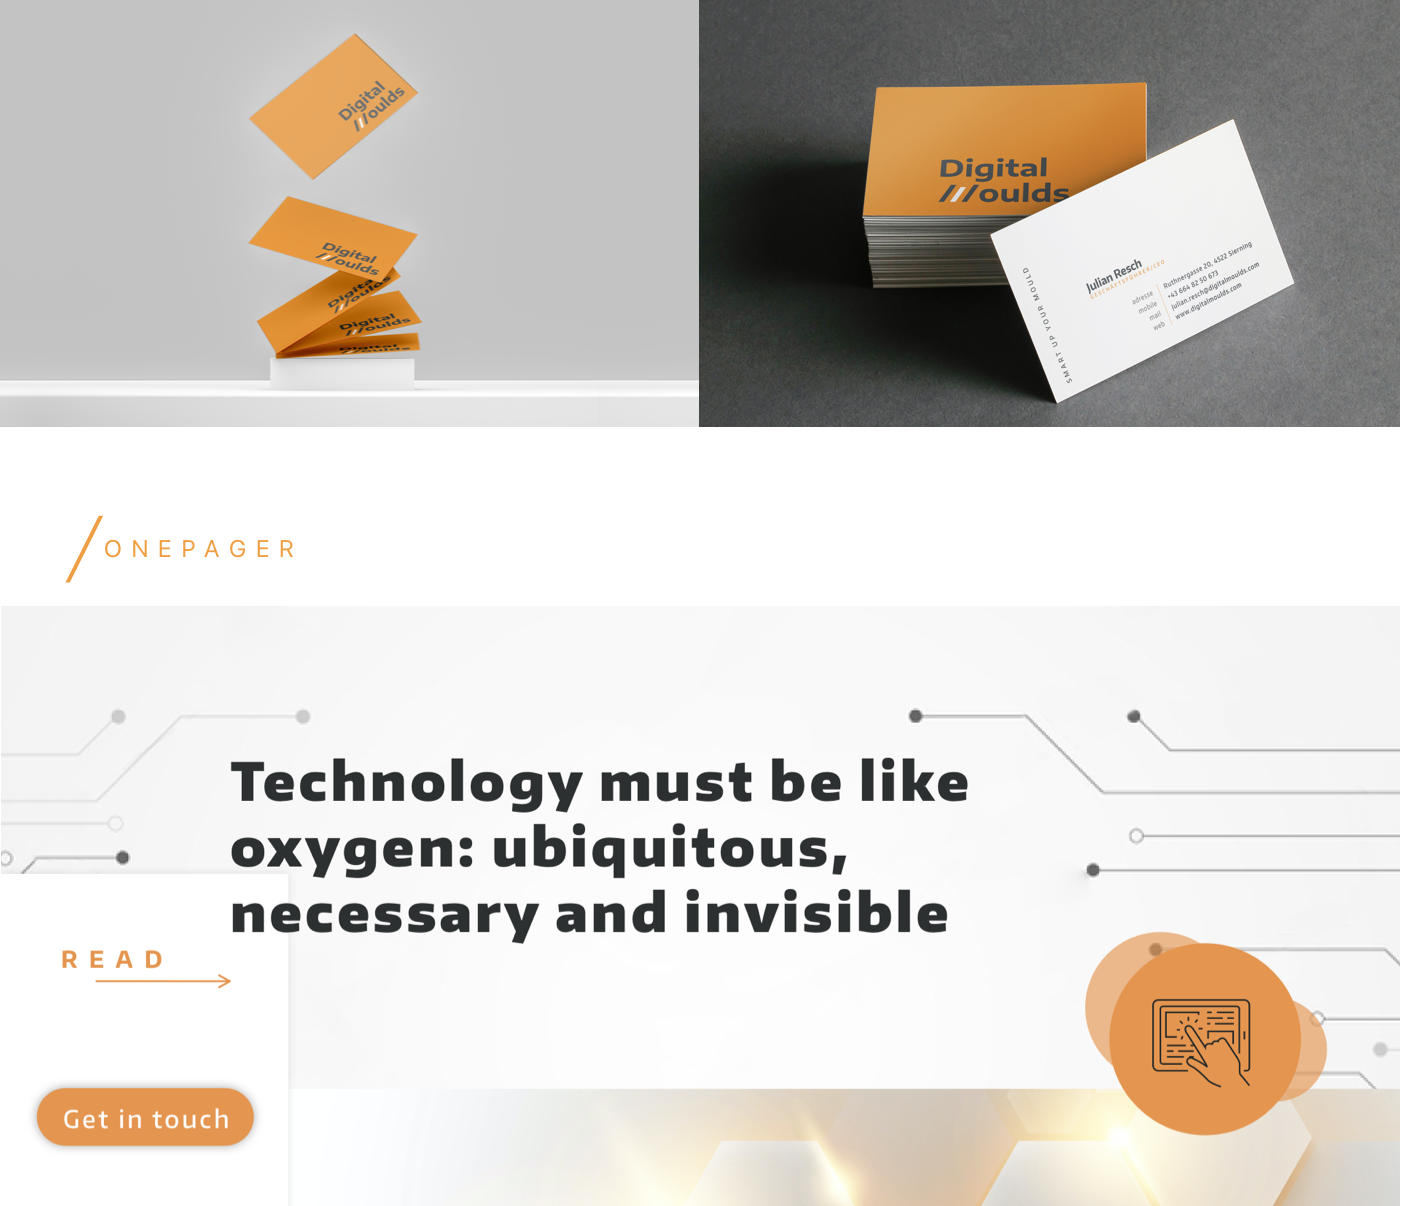 Digital Moulds Business Card and Onepager Design | Branding in Wien